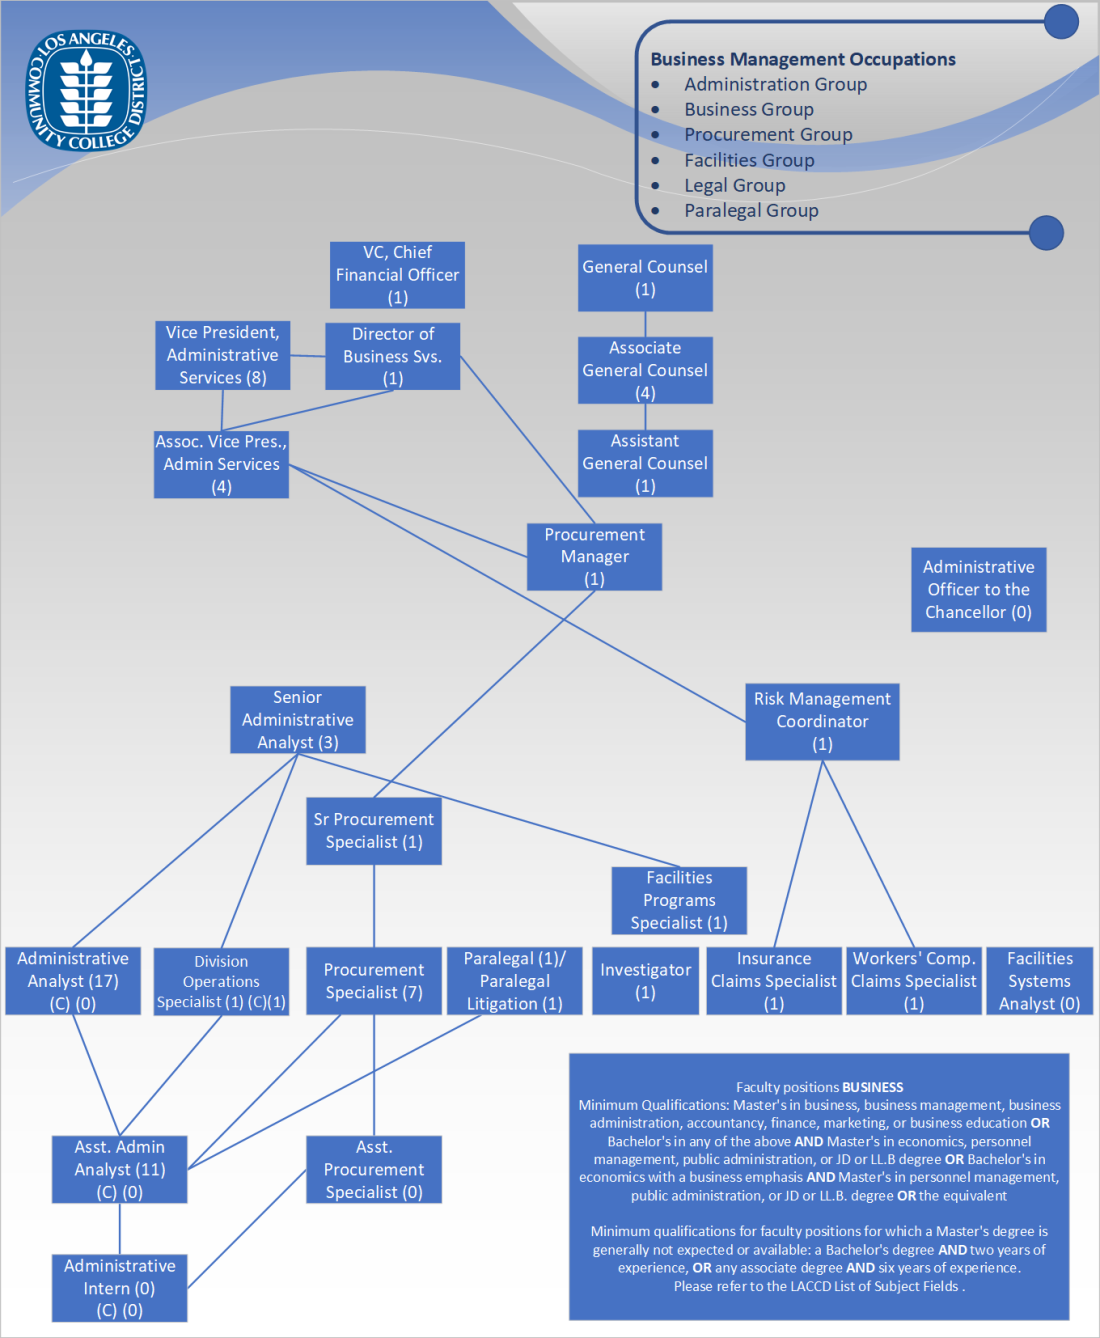 Org Chart - Administration, Business, Procurement, Facilities, Legal, and Paralegal Groups